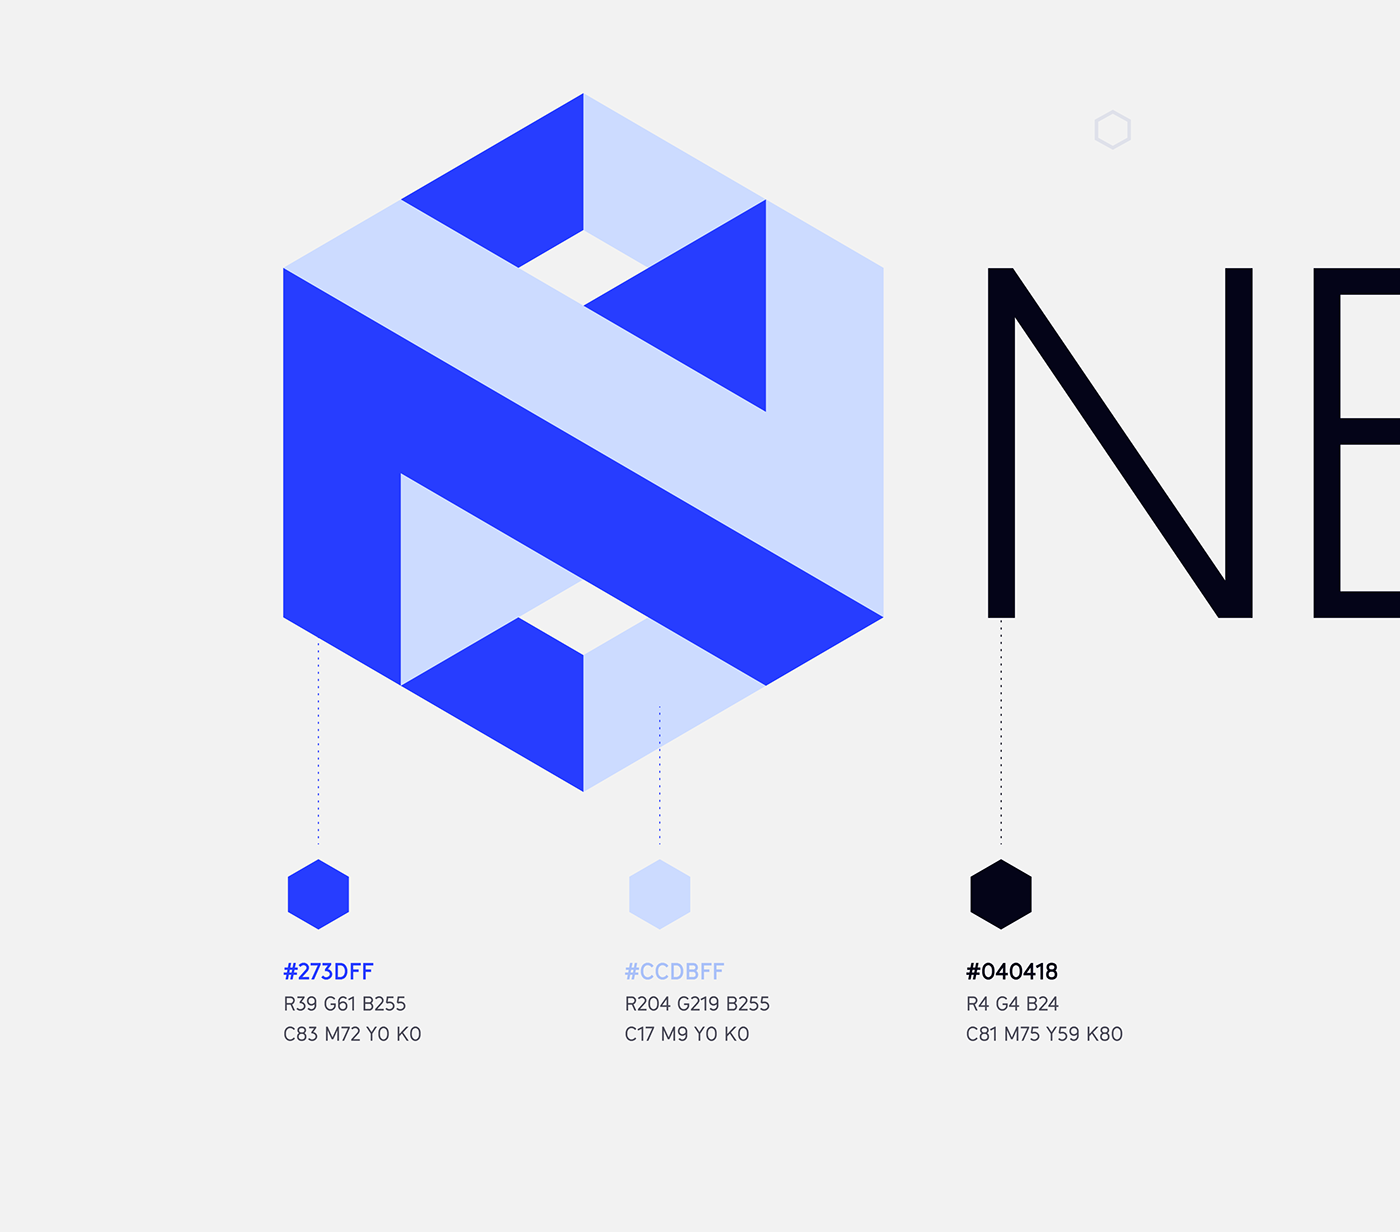 Application of primary color palettes on NEXTPART’s logo.